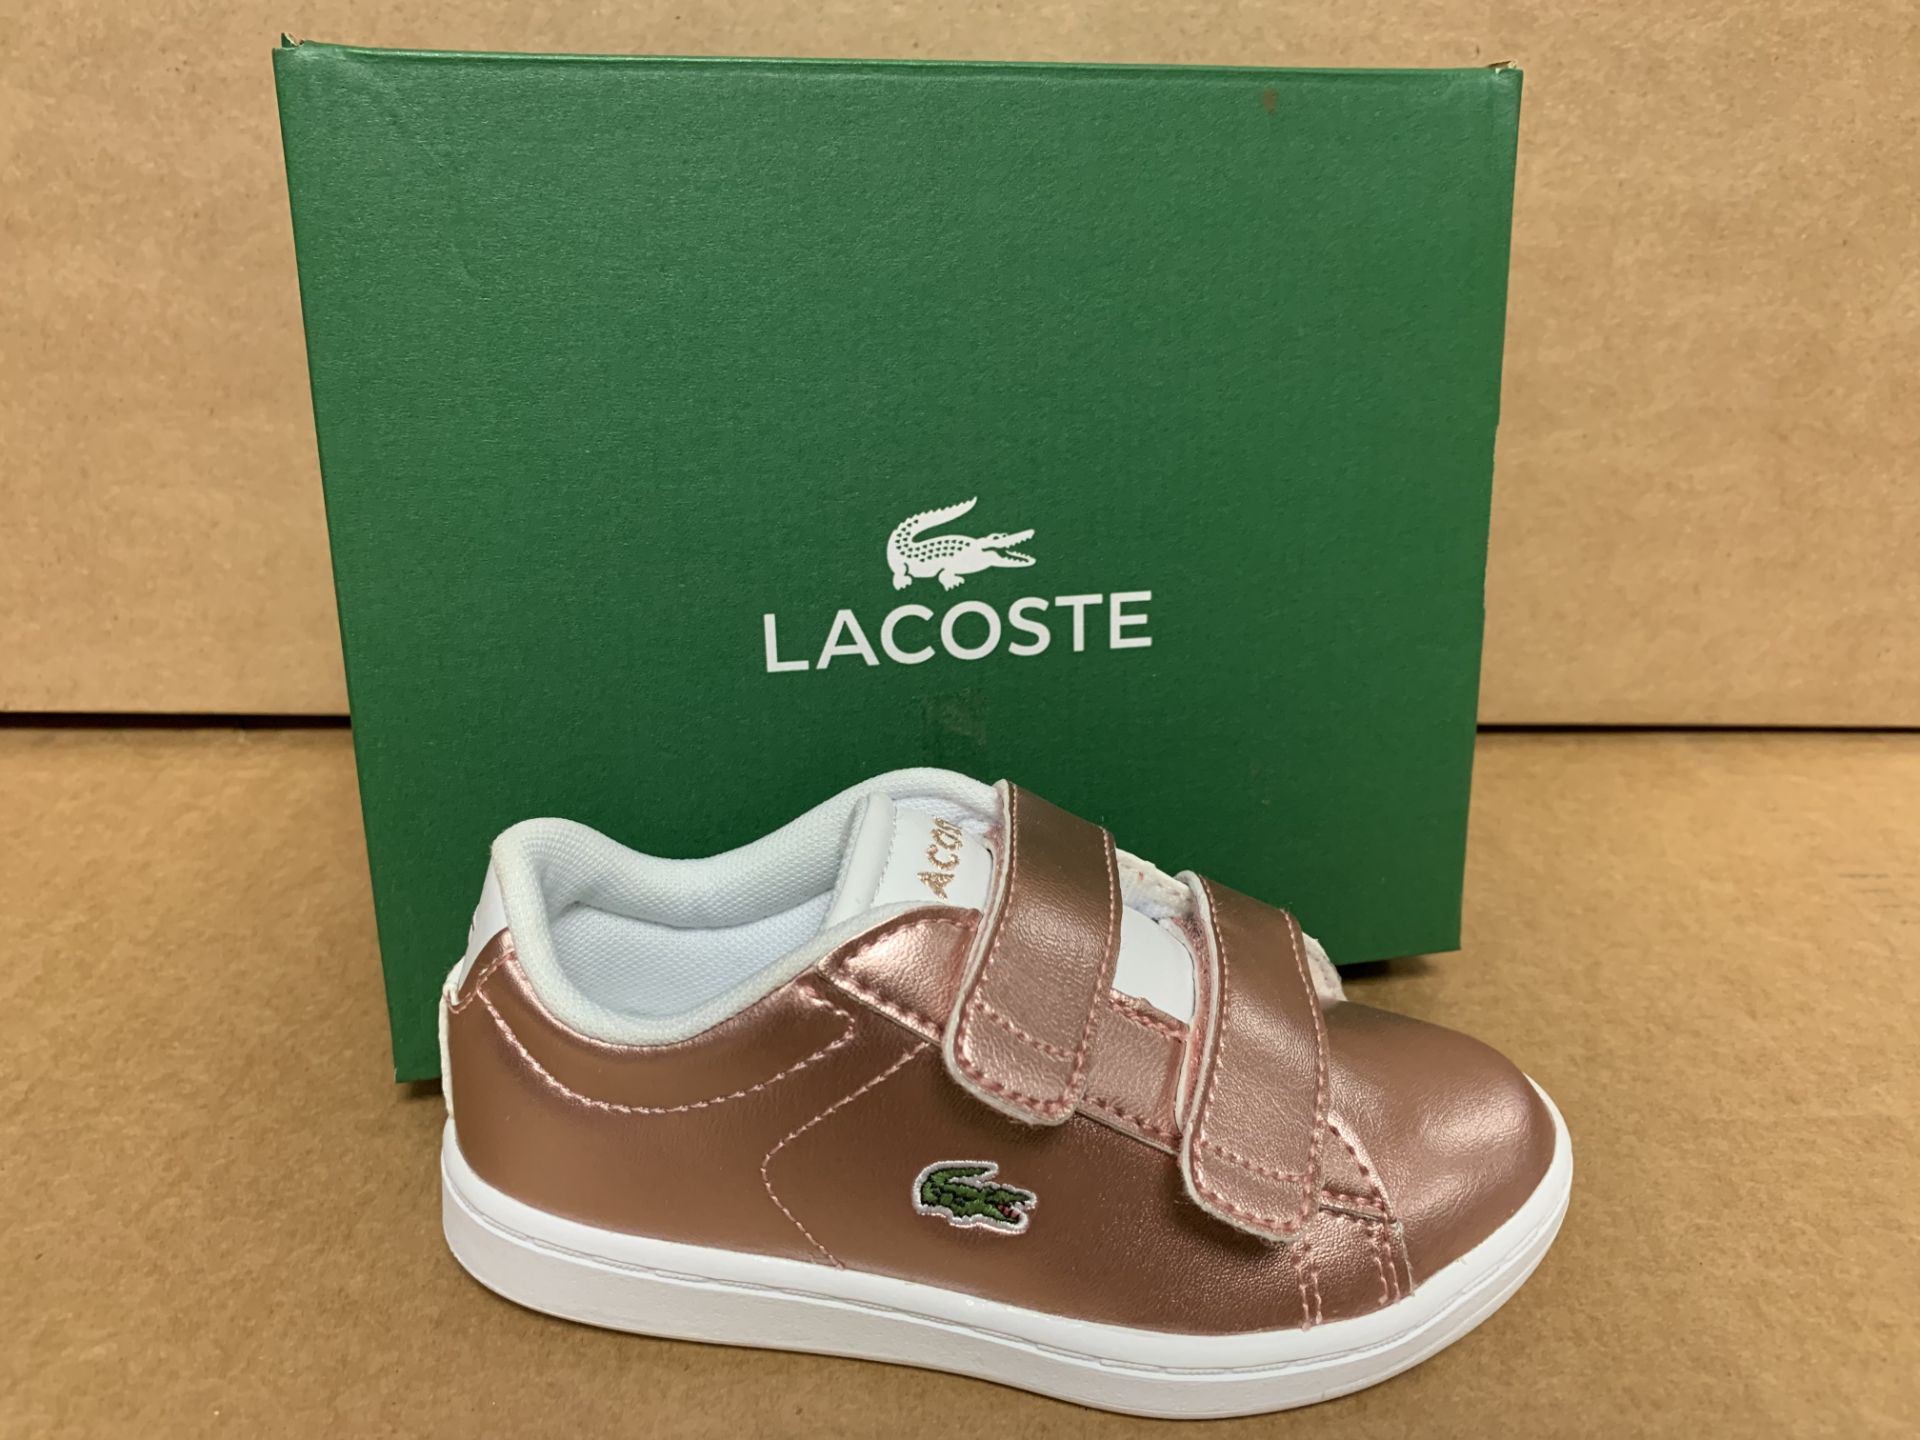 (NO VAT) 4 X BRAND NEW LACOSTE ROSE GOLD TRAINERS SIZE i8